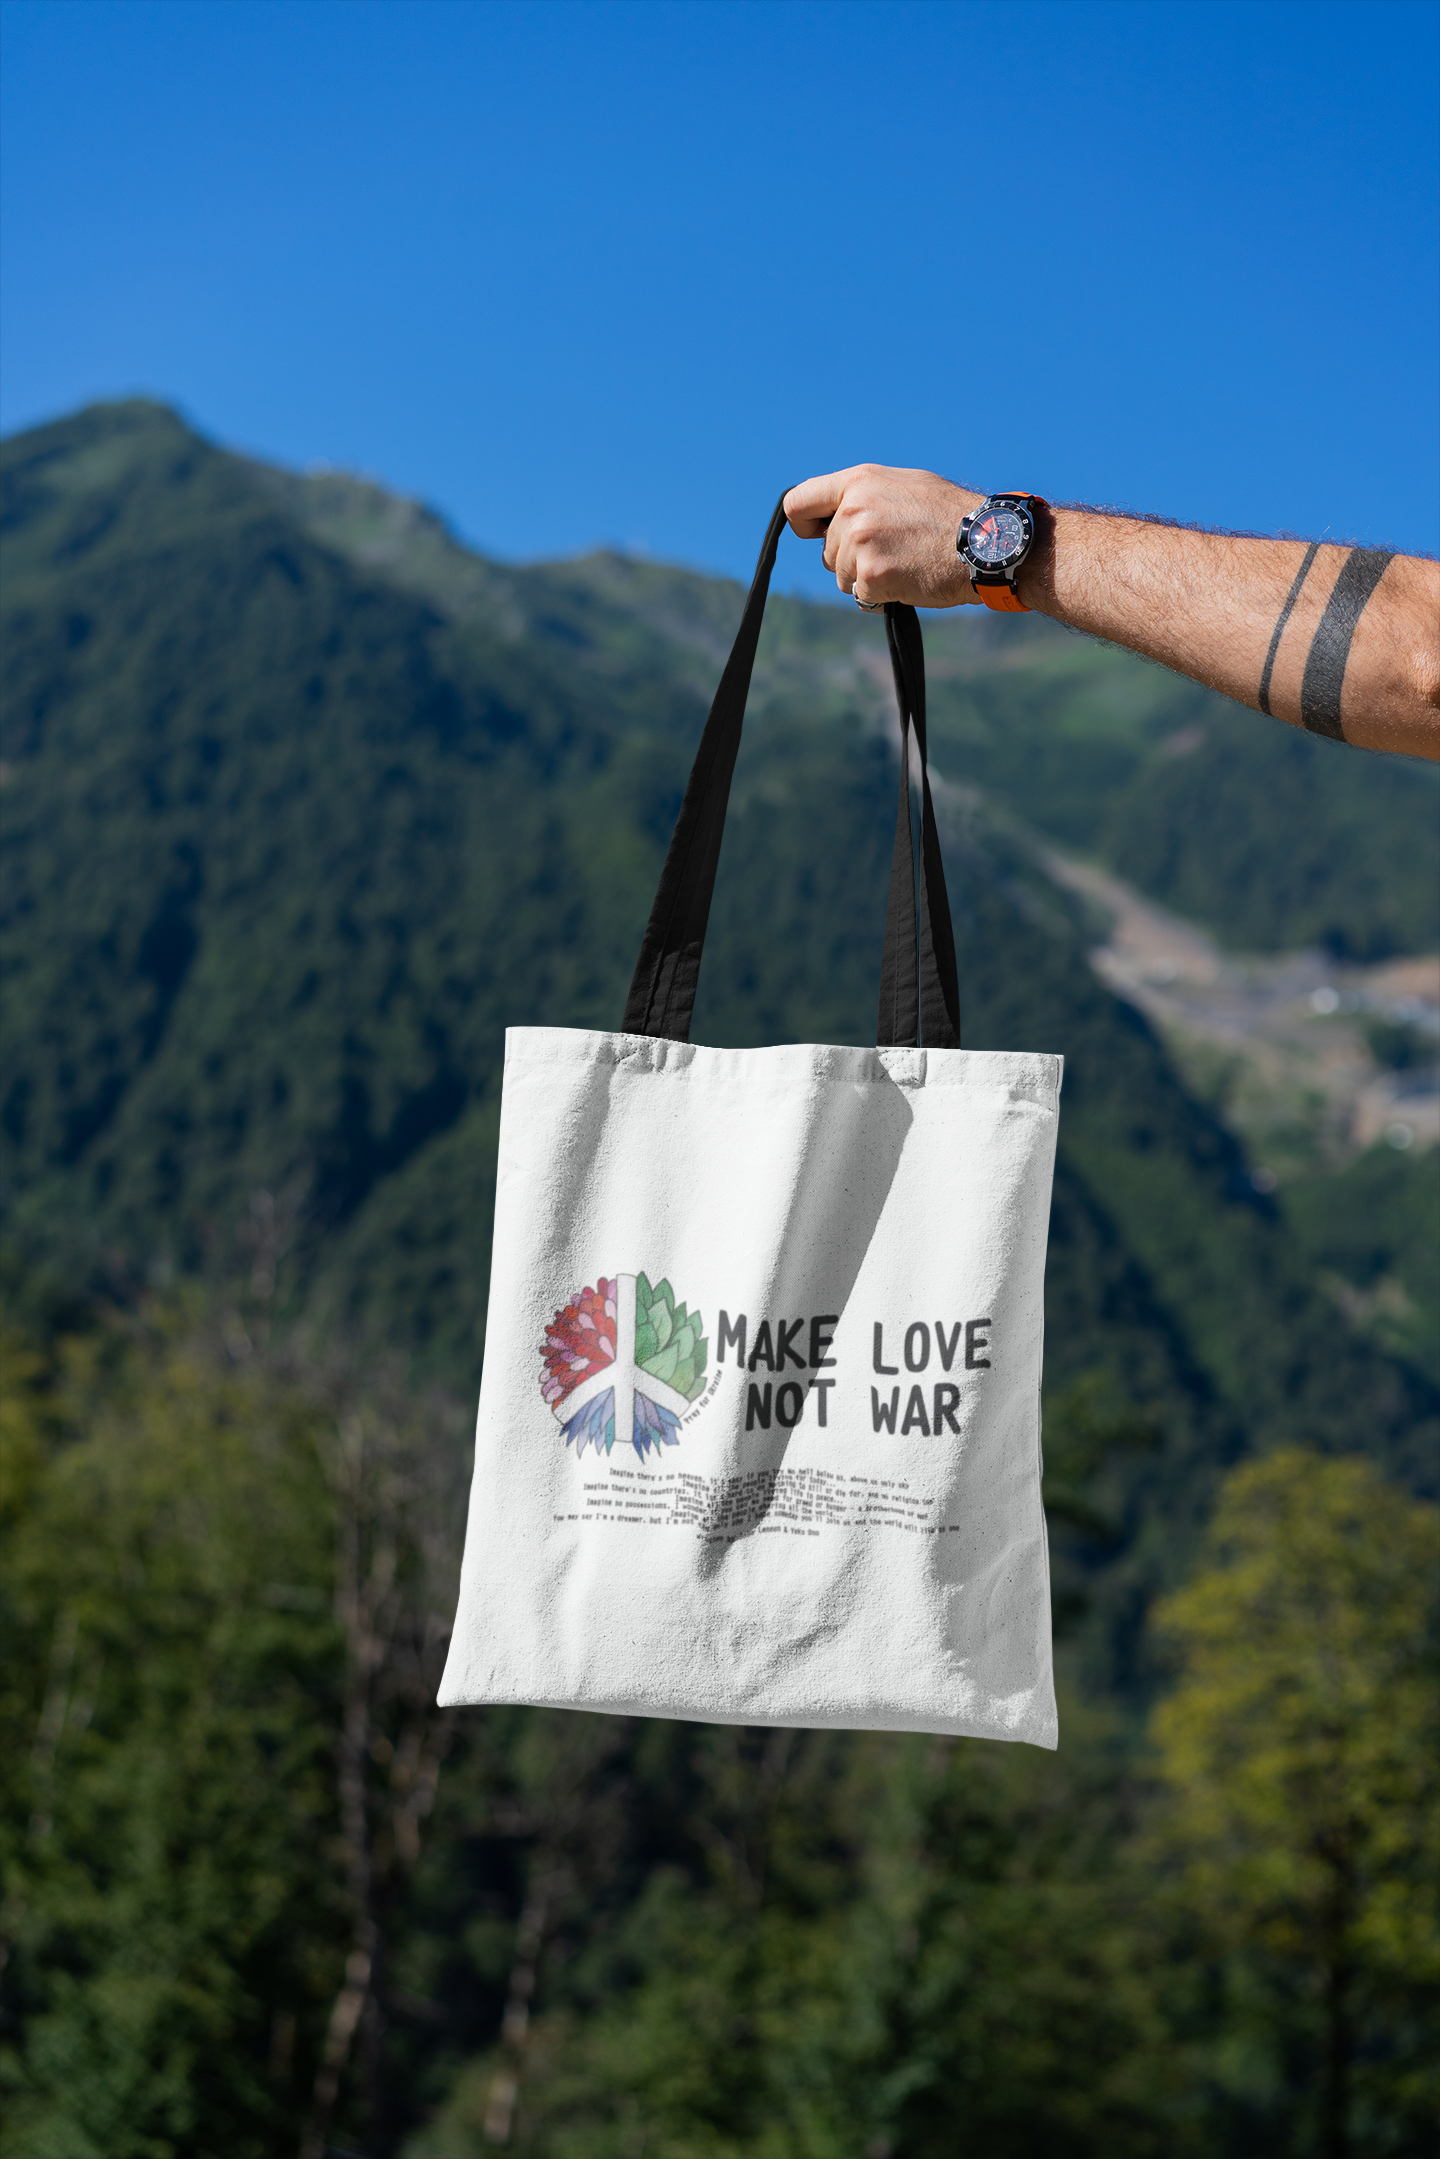 mockup-featuring-a-man-s-hand-holding-a-tote-bag-against-a-natural-scenery-3131-el1 (7).png